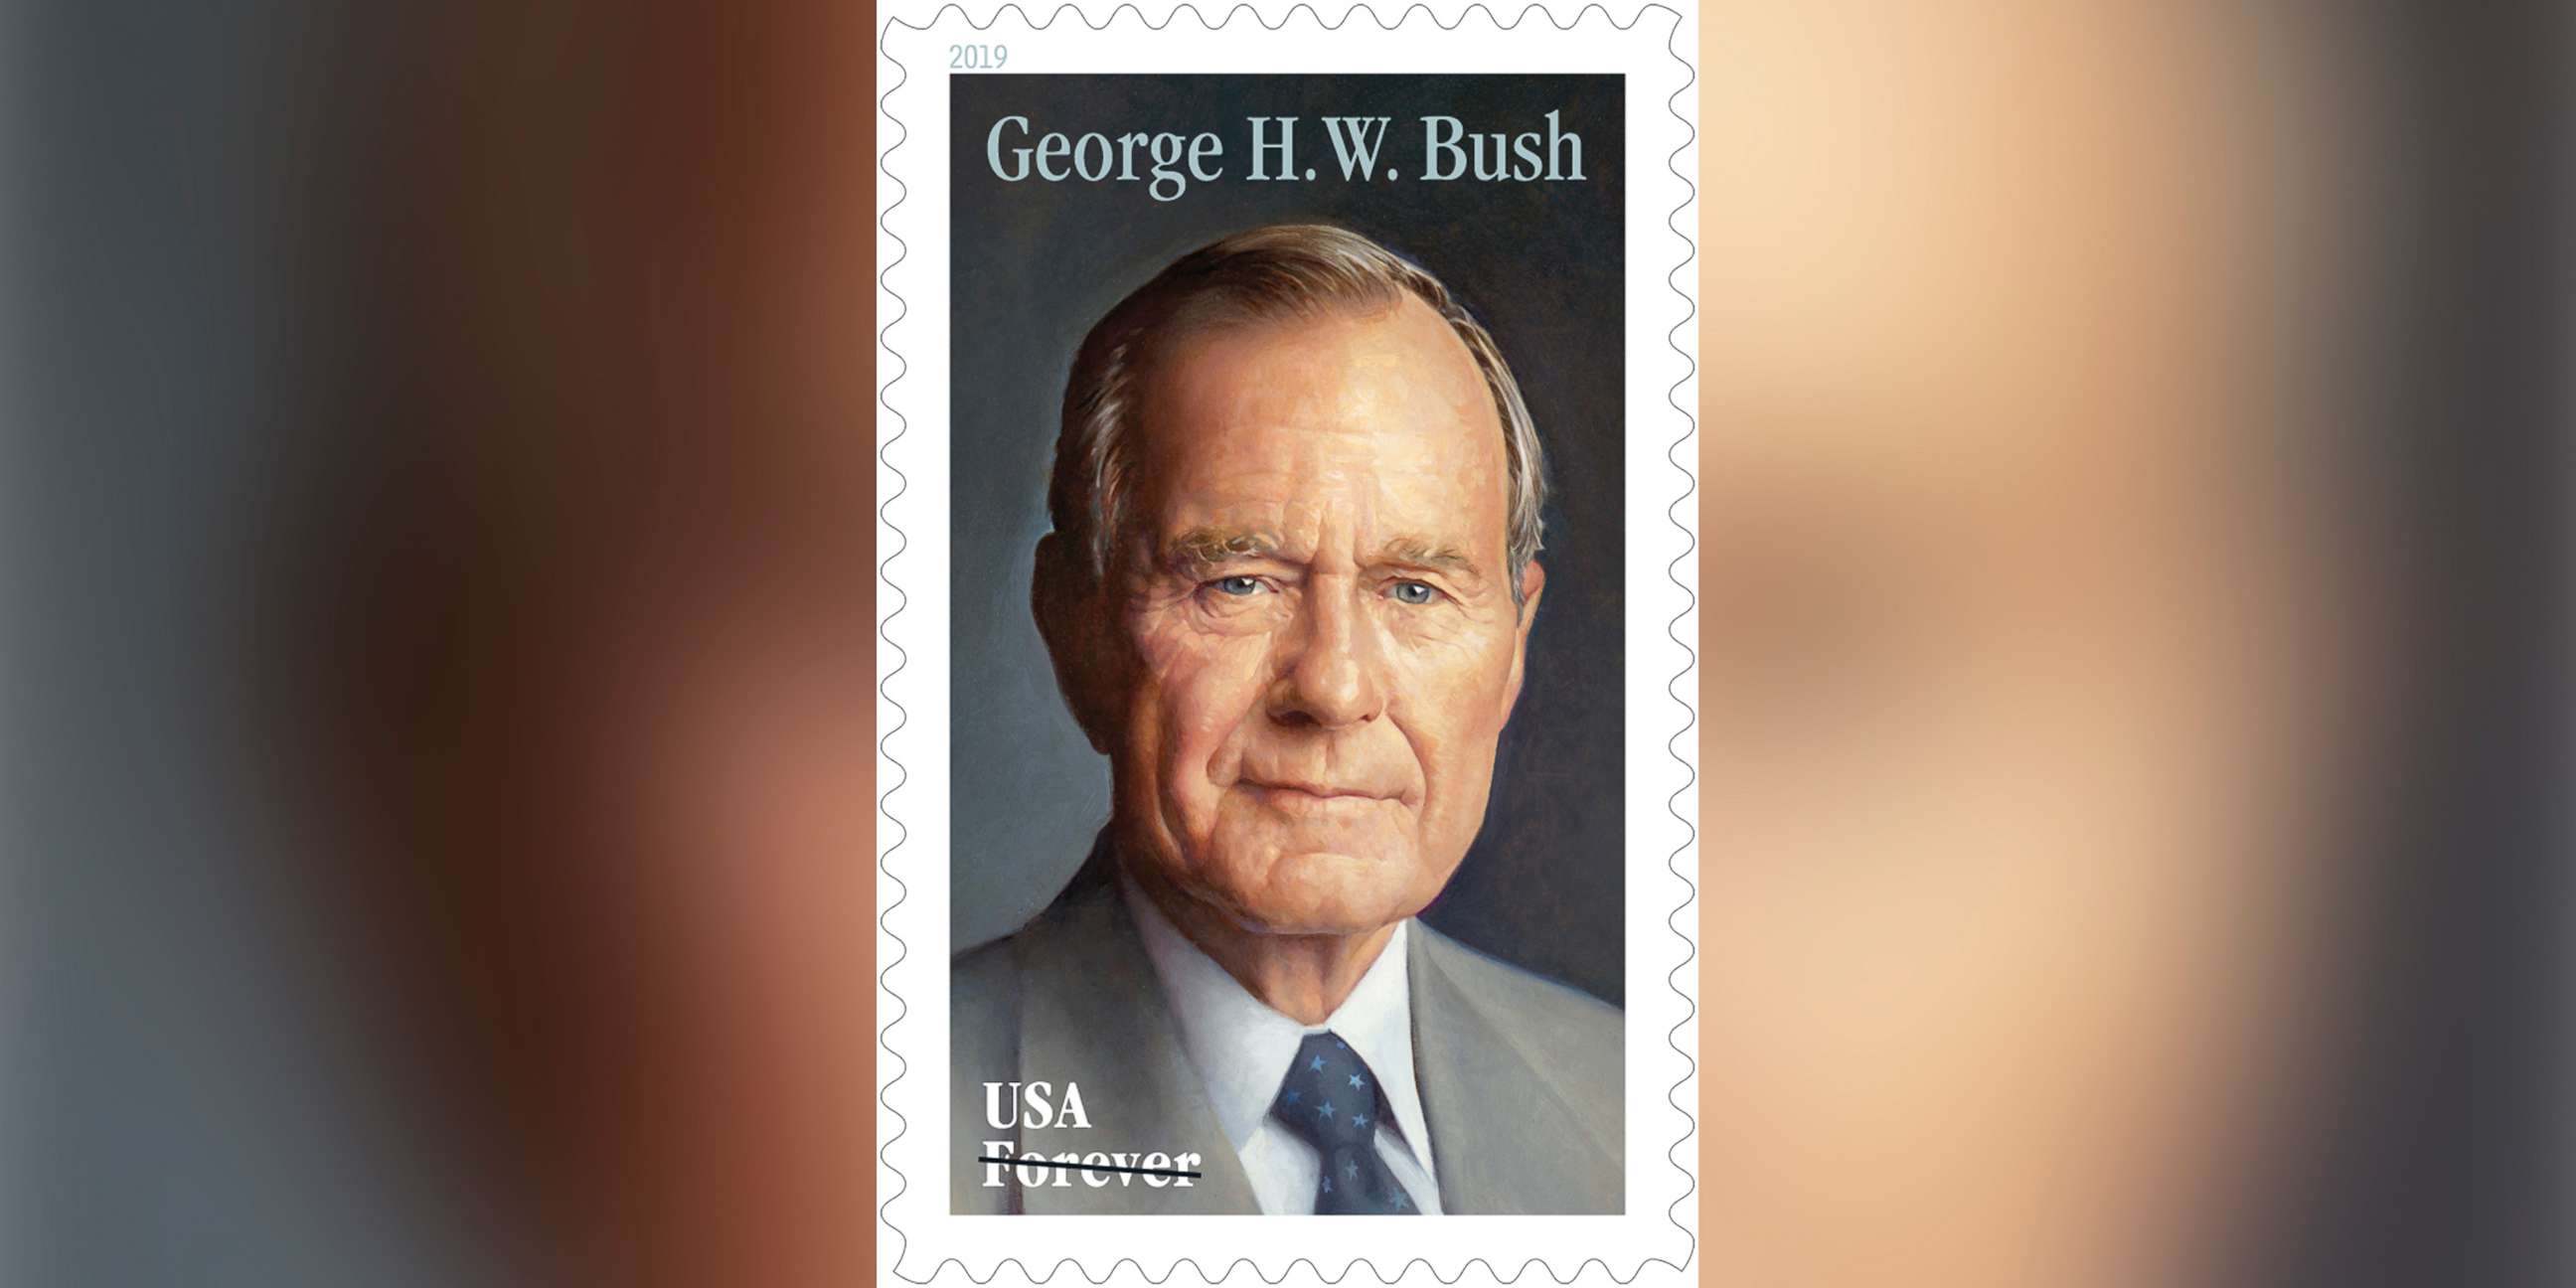 PHOTO: A commemorative Forever stamp honoring former President George H.W. Bush will be issued on his birthday, June 12. A first-day-of-issue ceremony will be held that day at the George H.W. Bush Presidential Library and Museum in College Station, Texas.